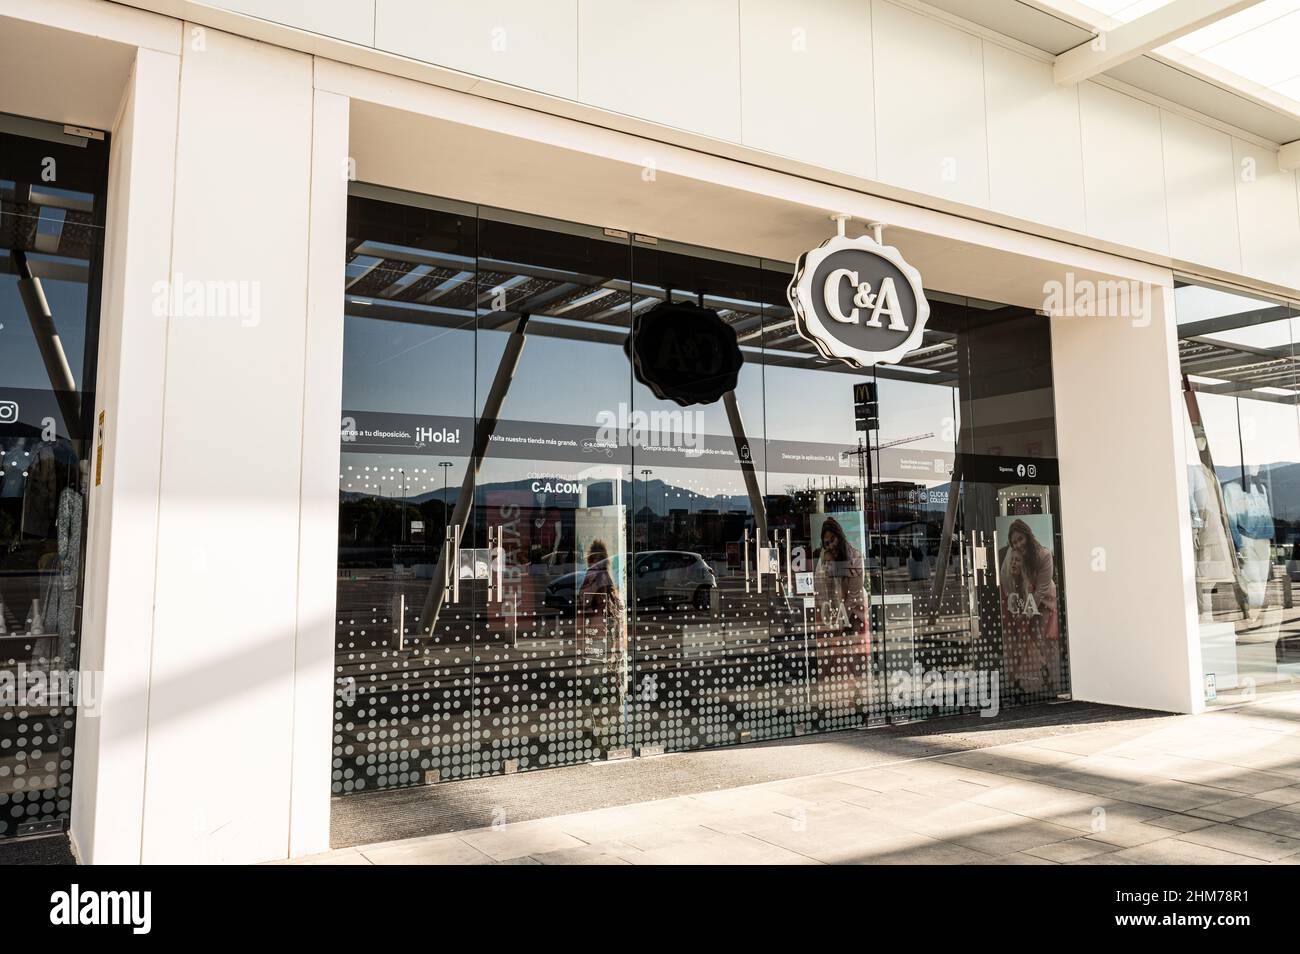 C&A fashion clothing store in Malaga, Spain Stock Photo - Alamy